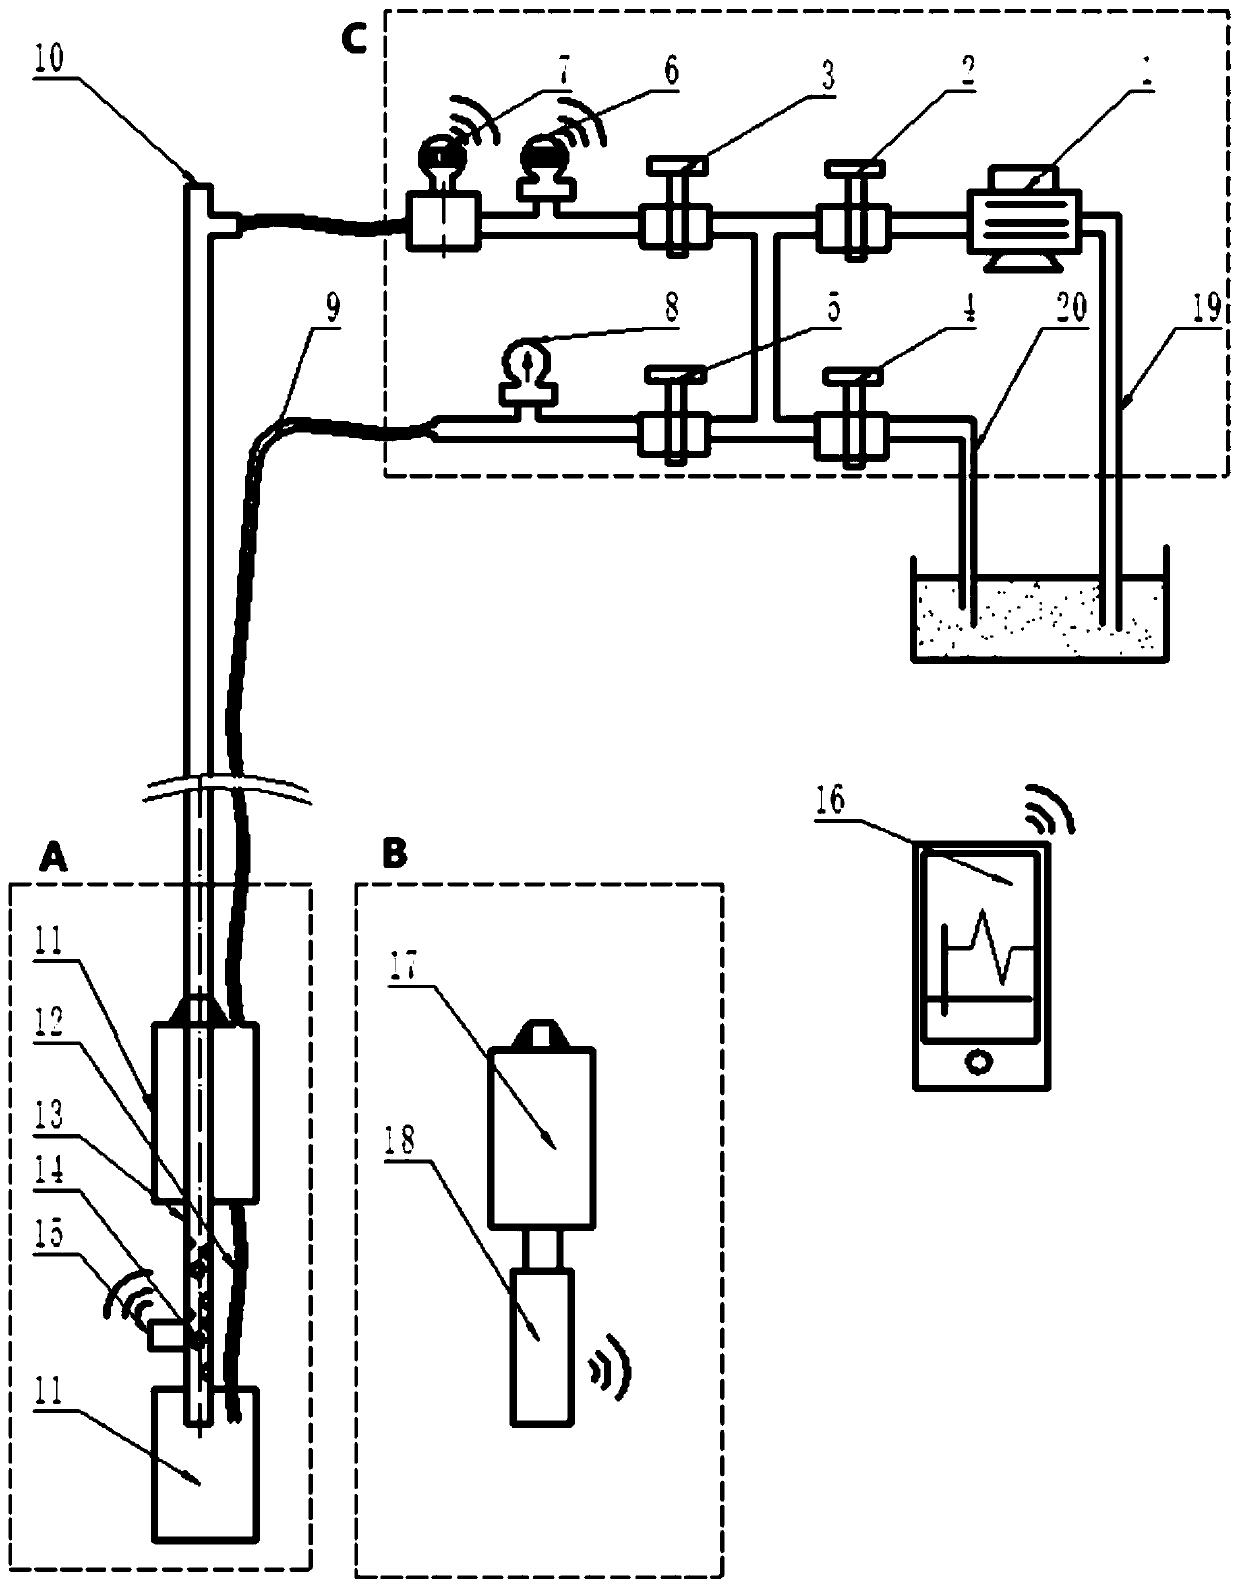 Water pressure cracking in-situ stress measurement wireless automatic well logging system